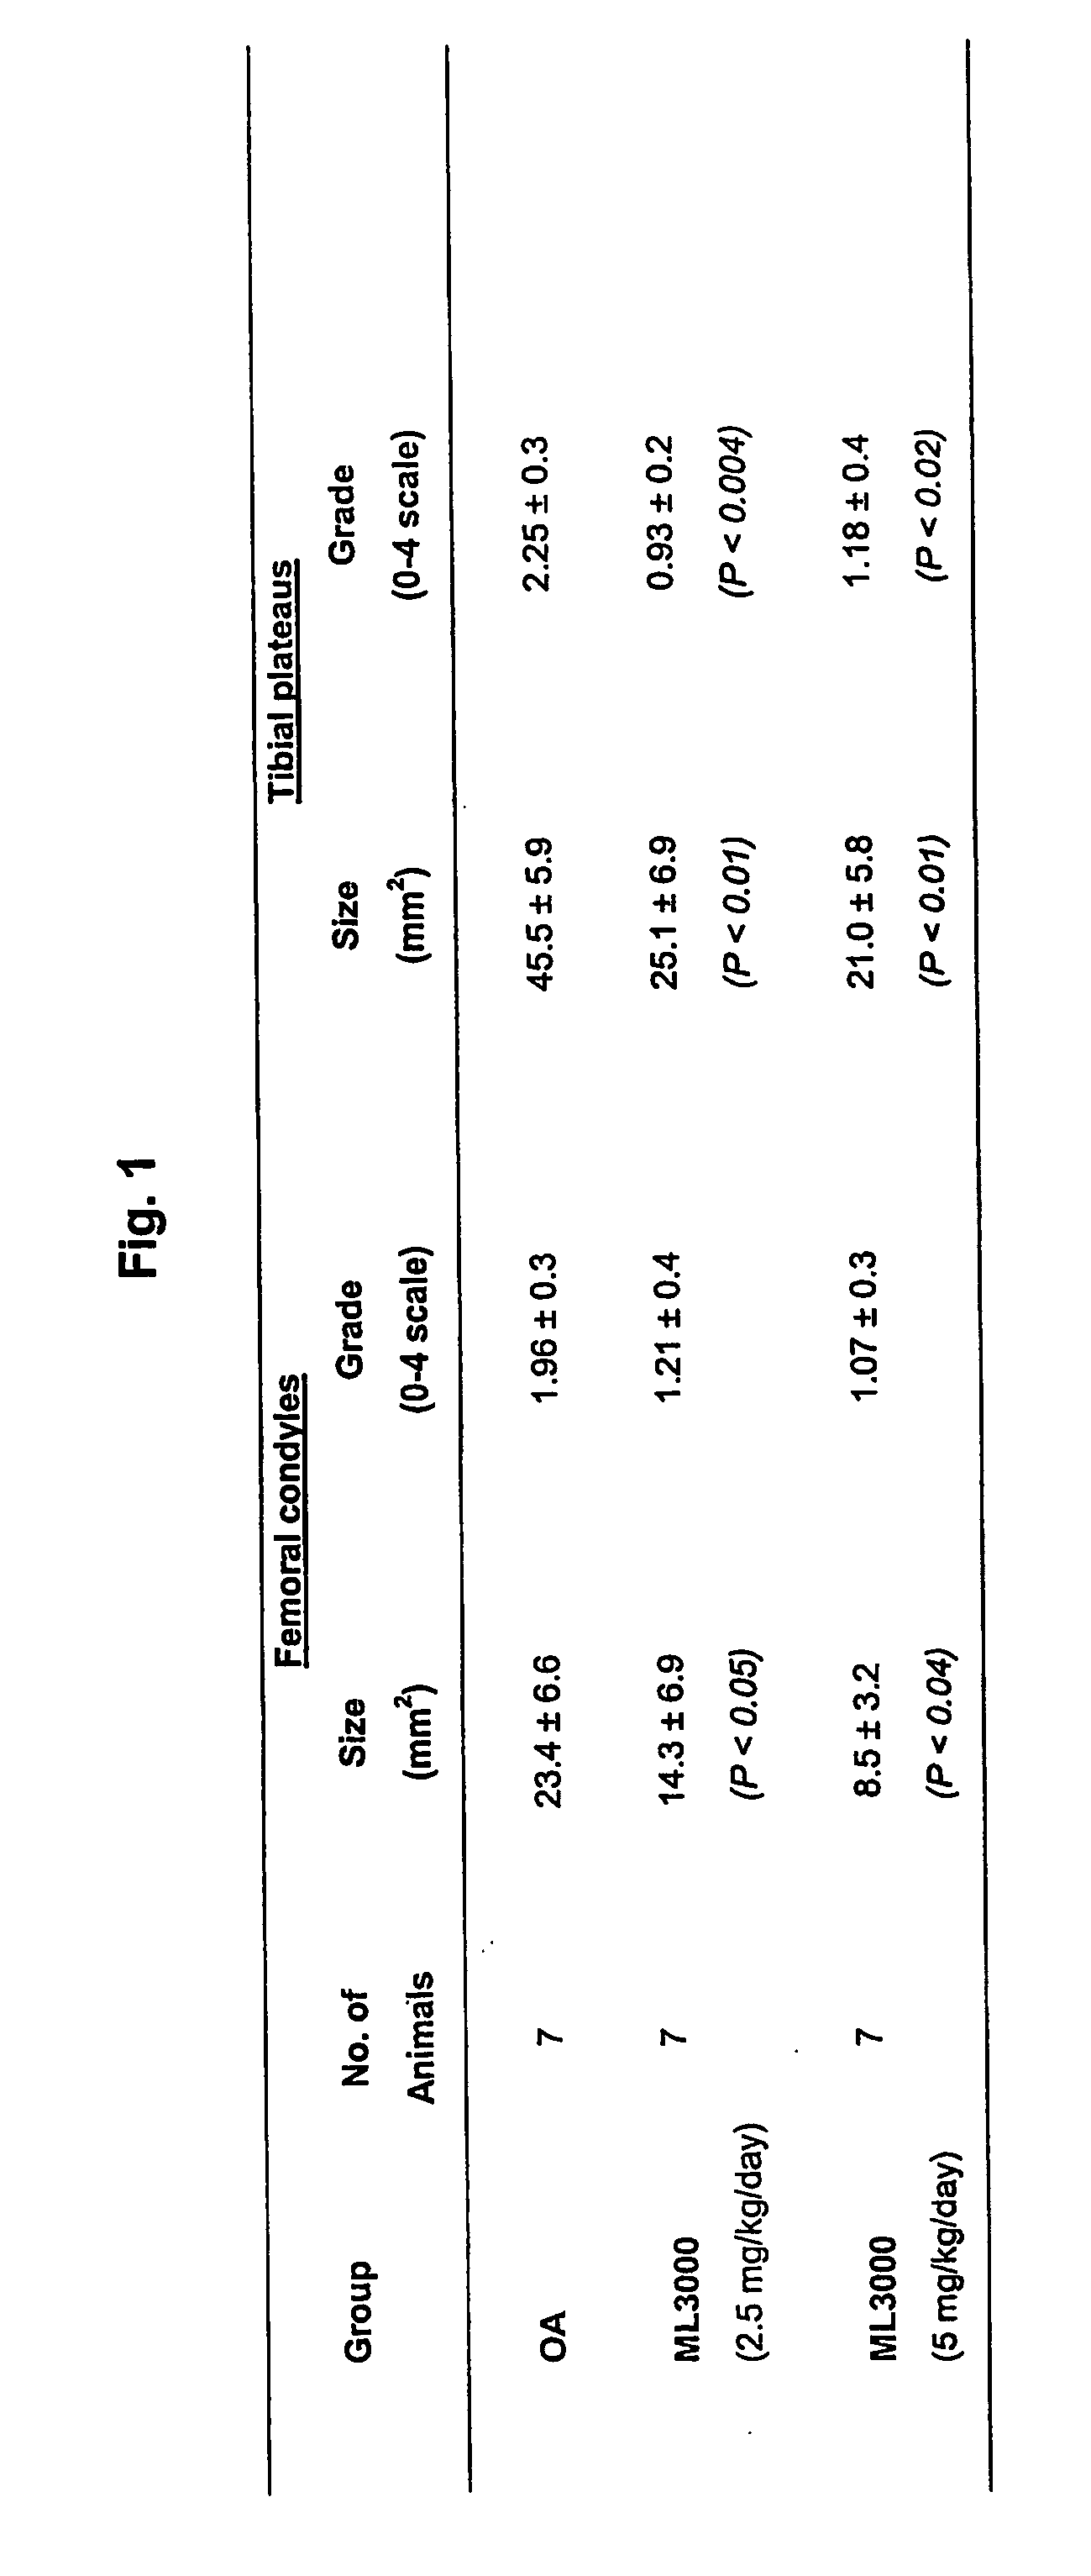 Use of annellated pyrrole compounds in the treatment of articular cartilage or subchondral bone degenaration